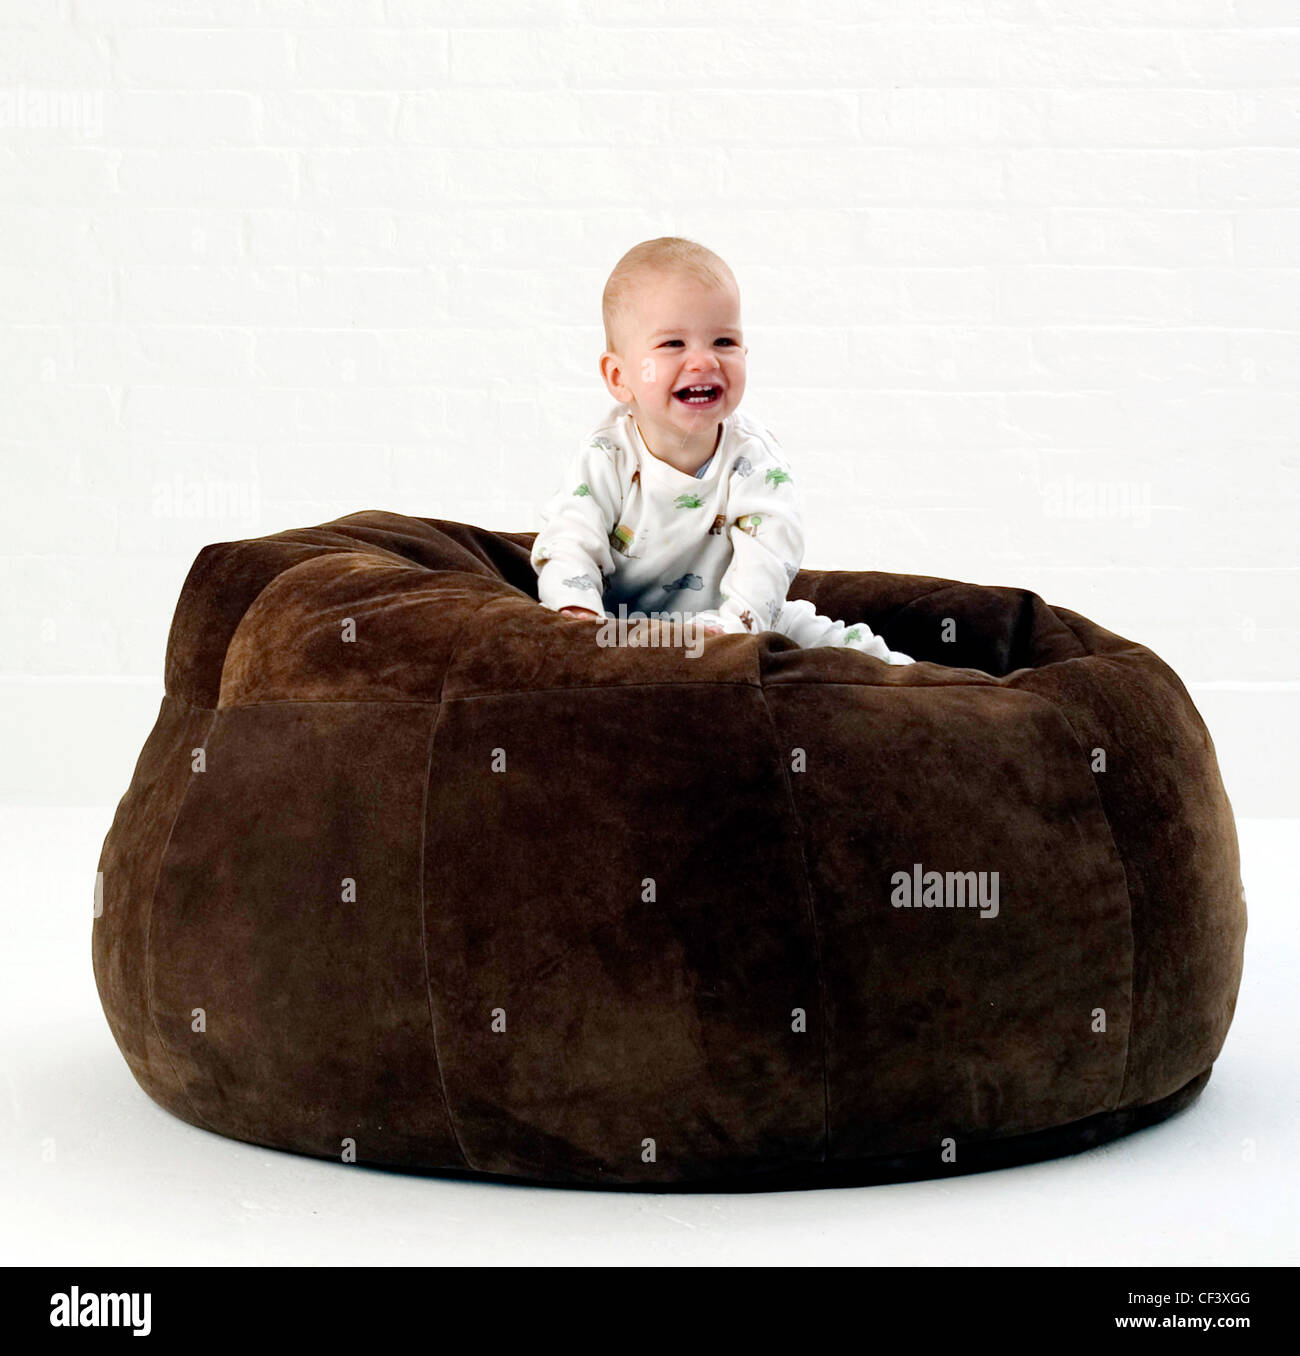 Male baby wearing white patterned babygro, sitting on large brown suede beanbag looking to distance smiling, against white Stock Photo